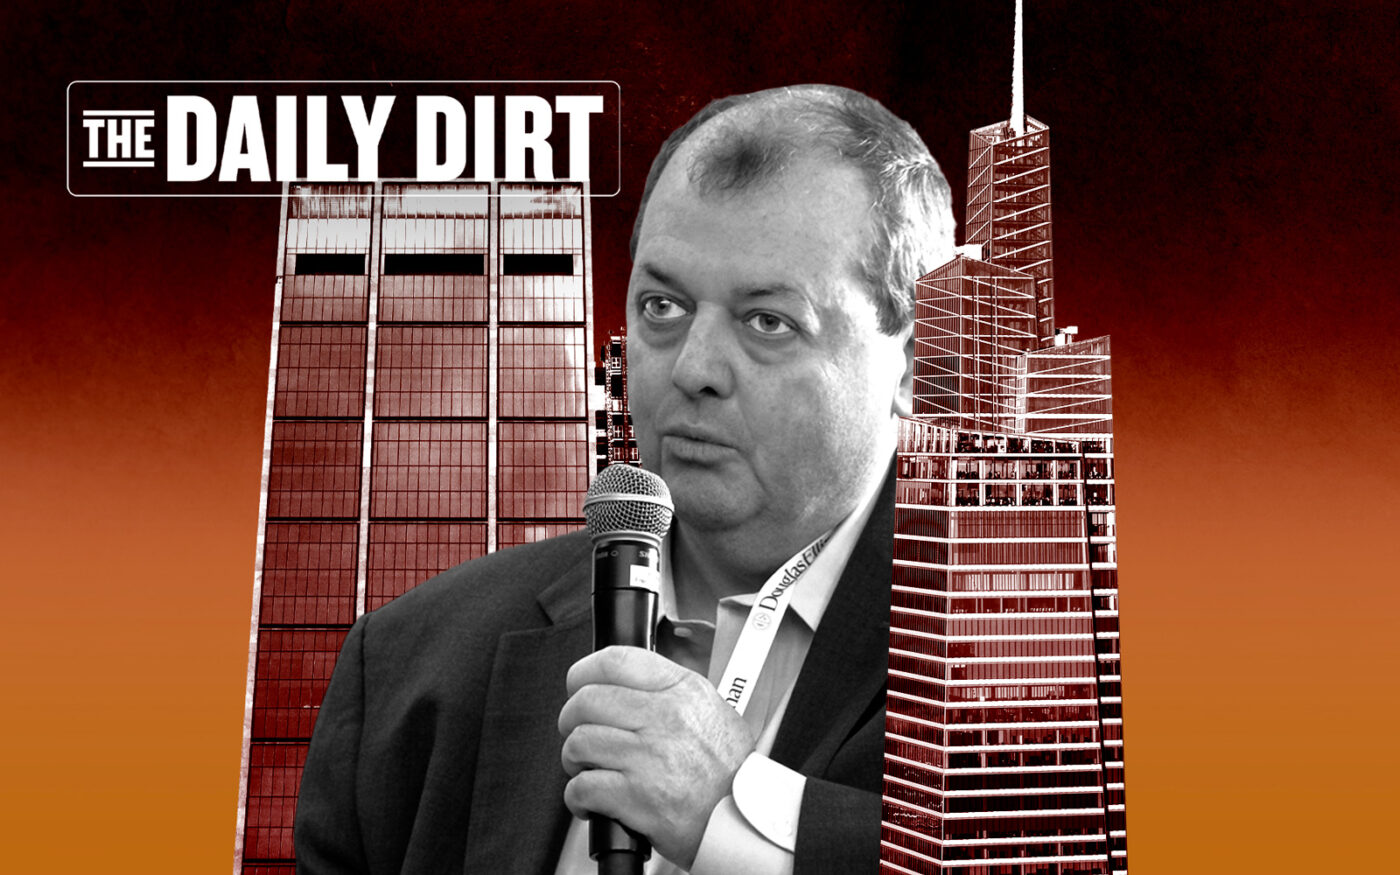 Report Details CHIP’s Cash Burn Ahead of RSA Merger: The Daily Dirt